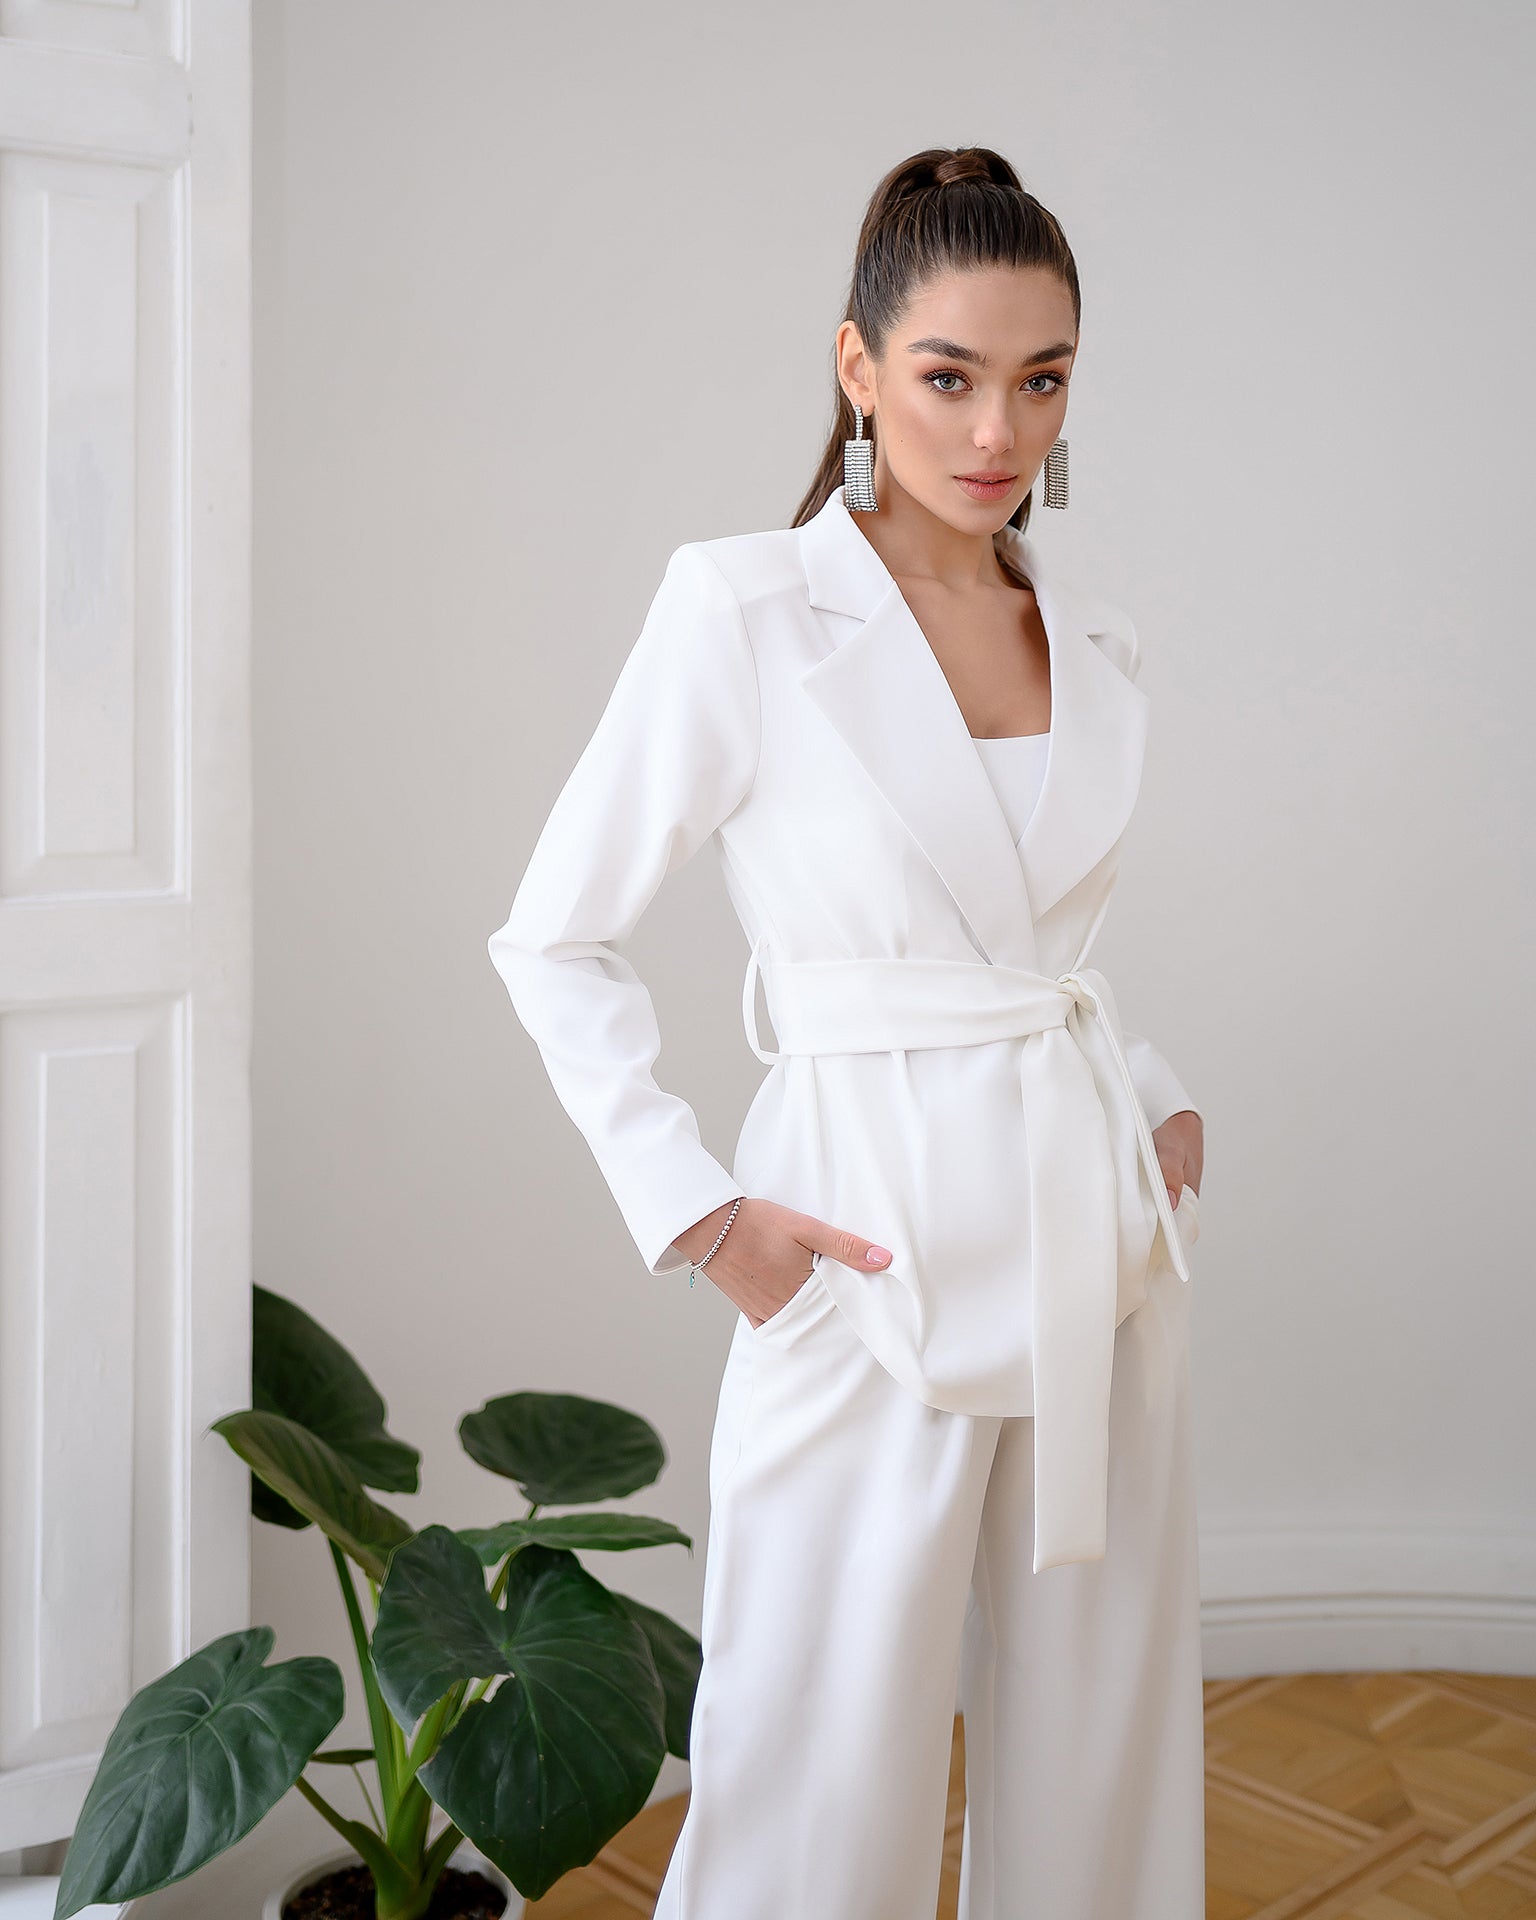 White Belted Wide-Leg Suit 3-Piece